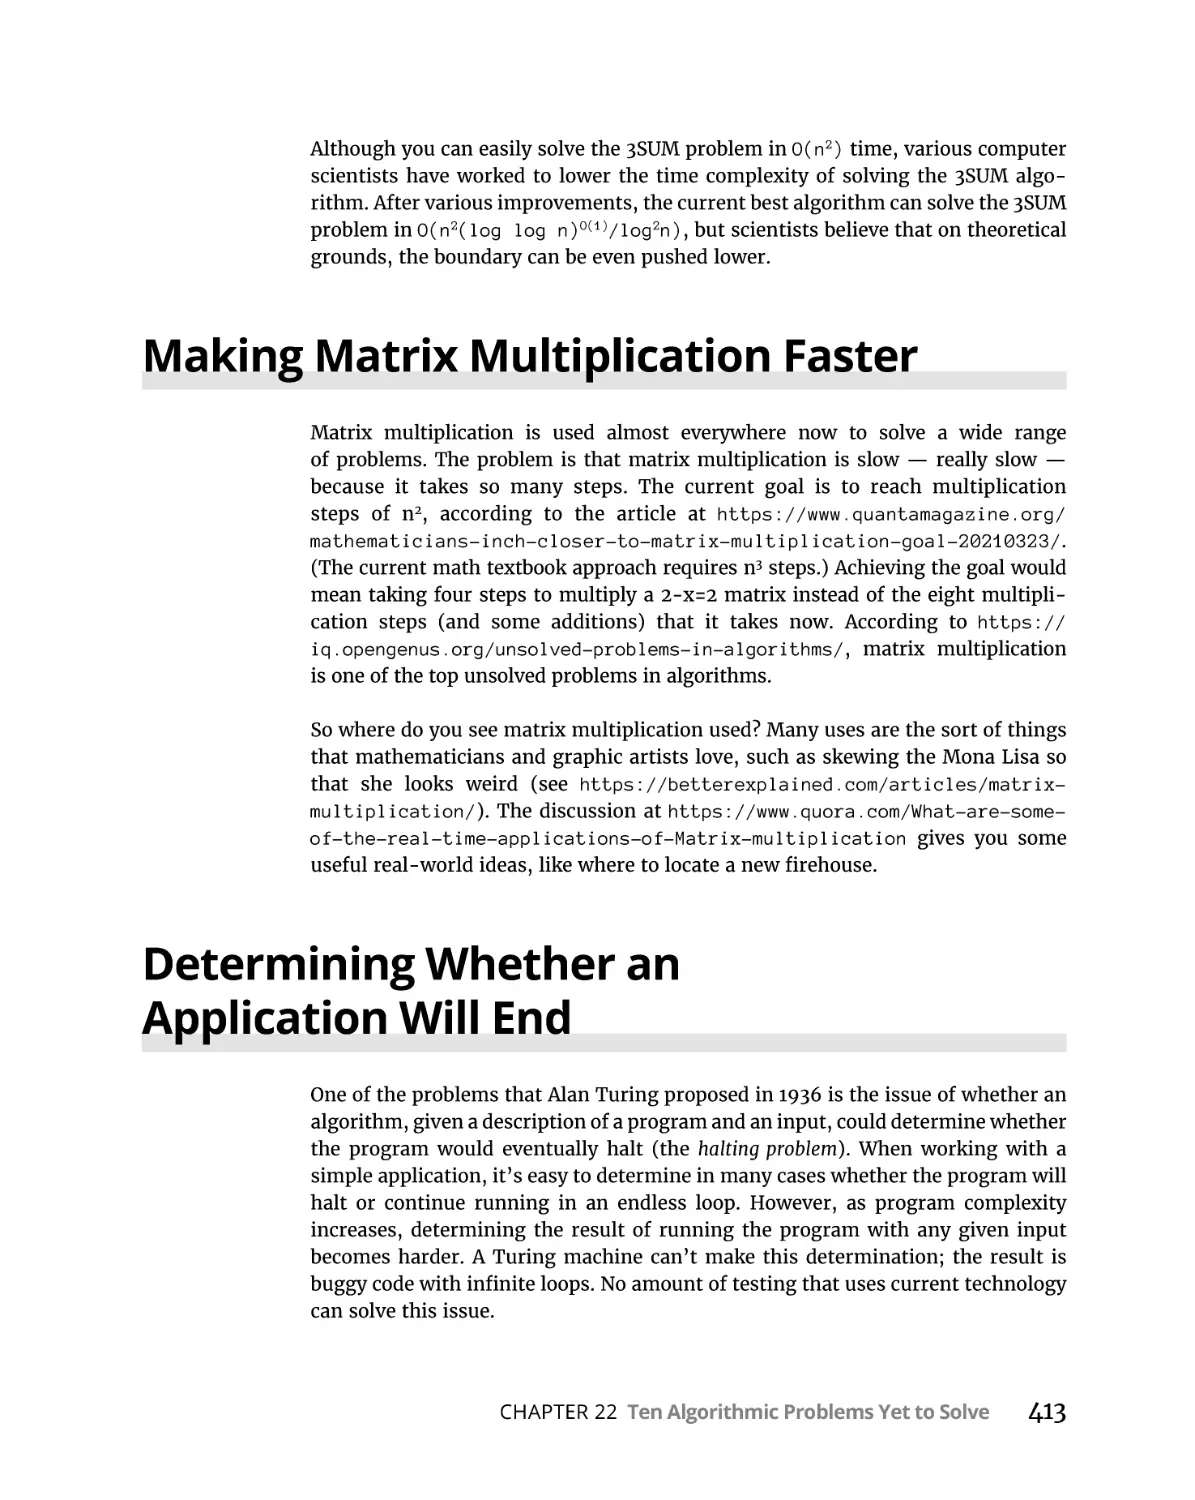 Making Matrix Multiplication Faster
Determining Whether an Application Will End